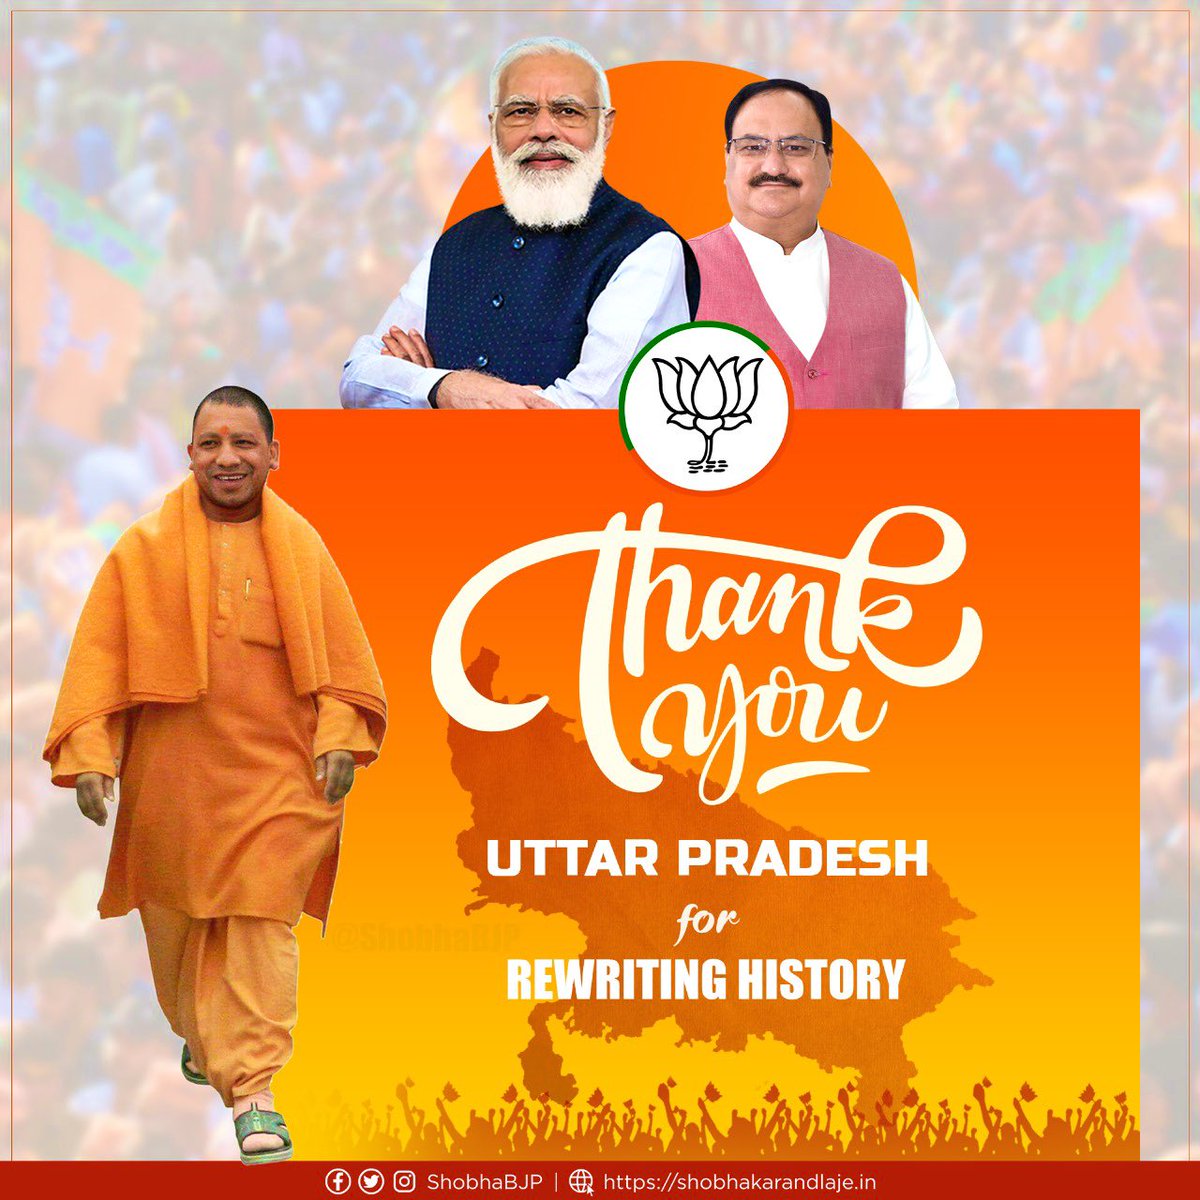 I would like to congratulate my twin brother @JPNadda for leading from the front the charge of @BJP4India in achieving this momentous victory across #UPElections.